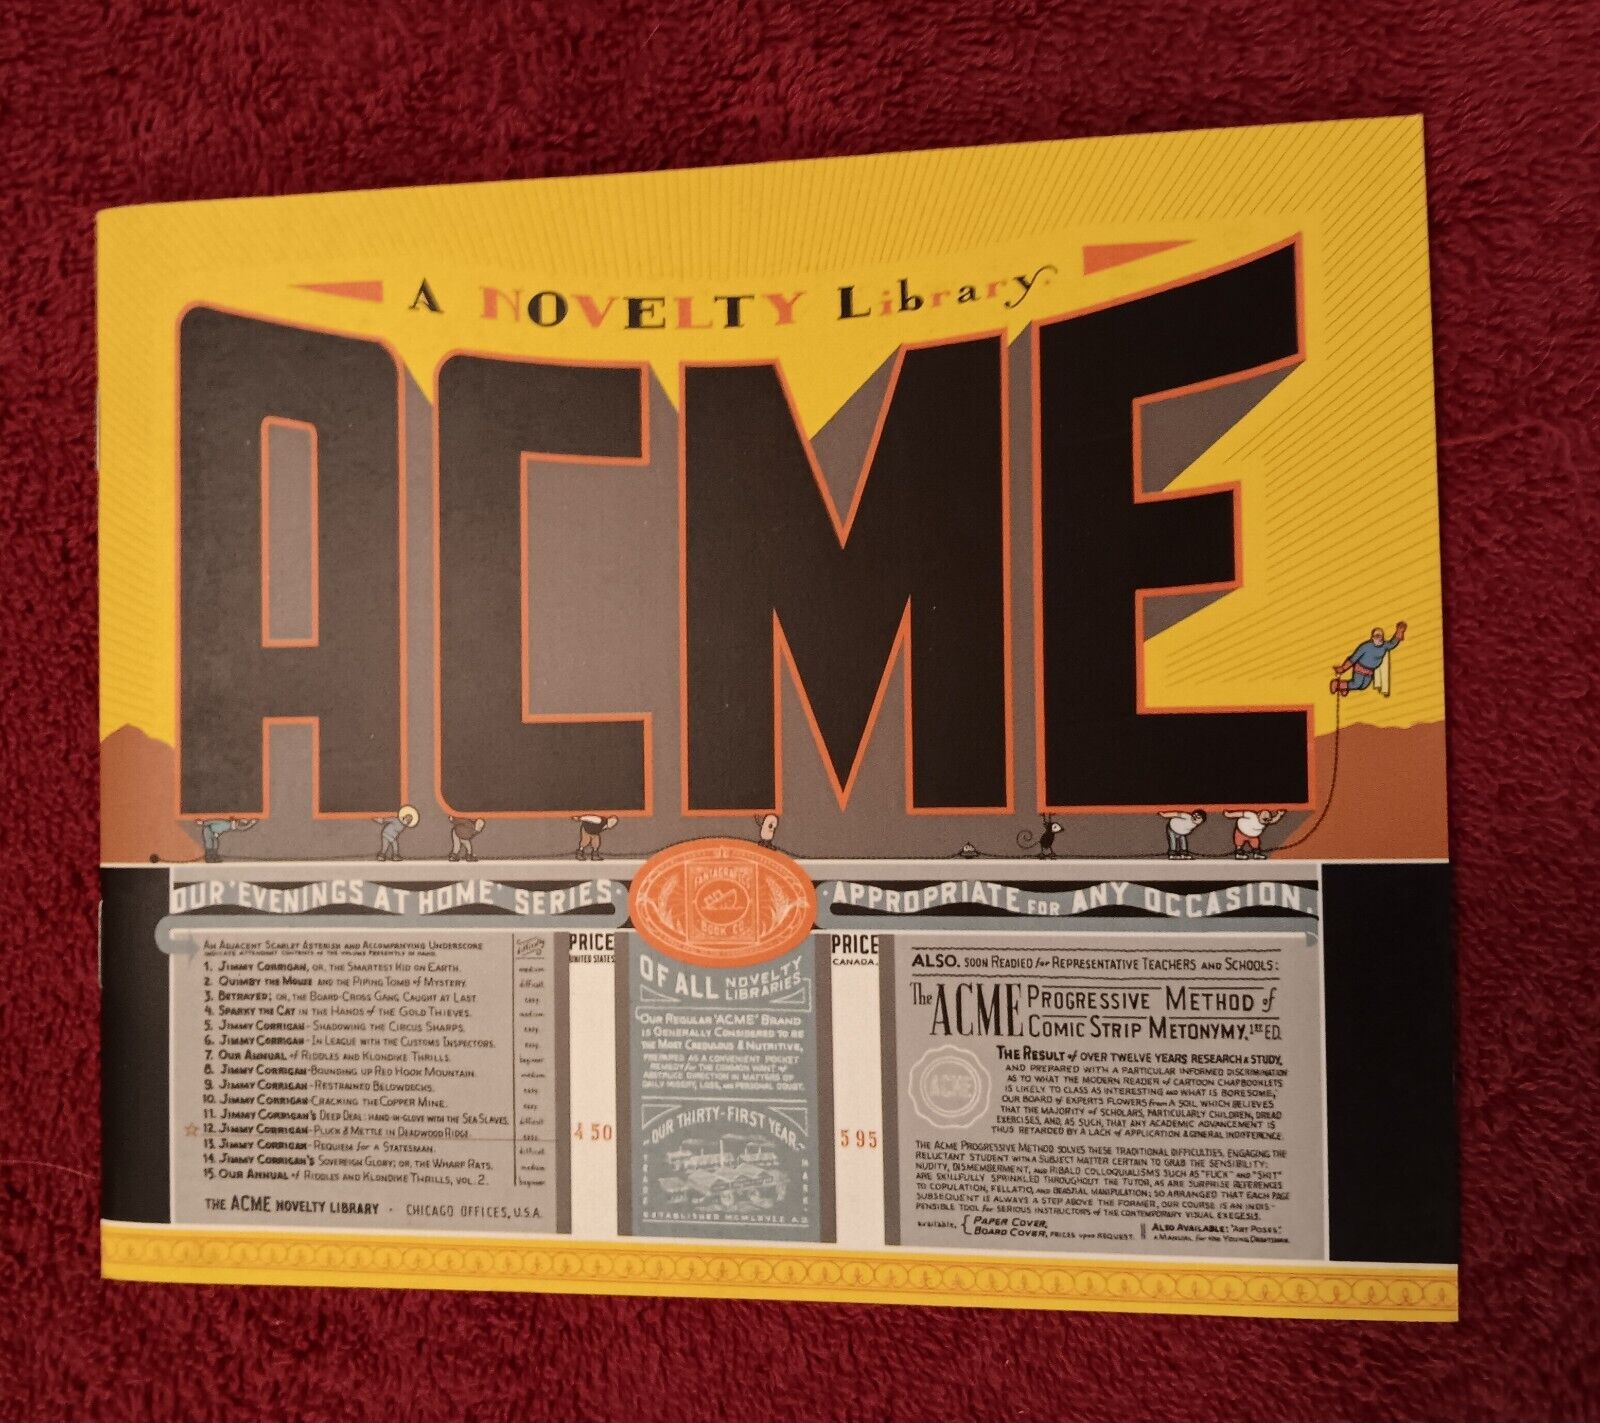 The ACME Novelty Library - vol.11 issue12 - TPB 1999 Jimmy Corrigan